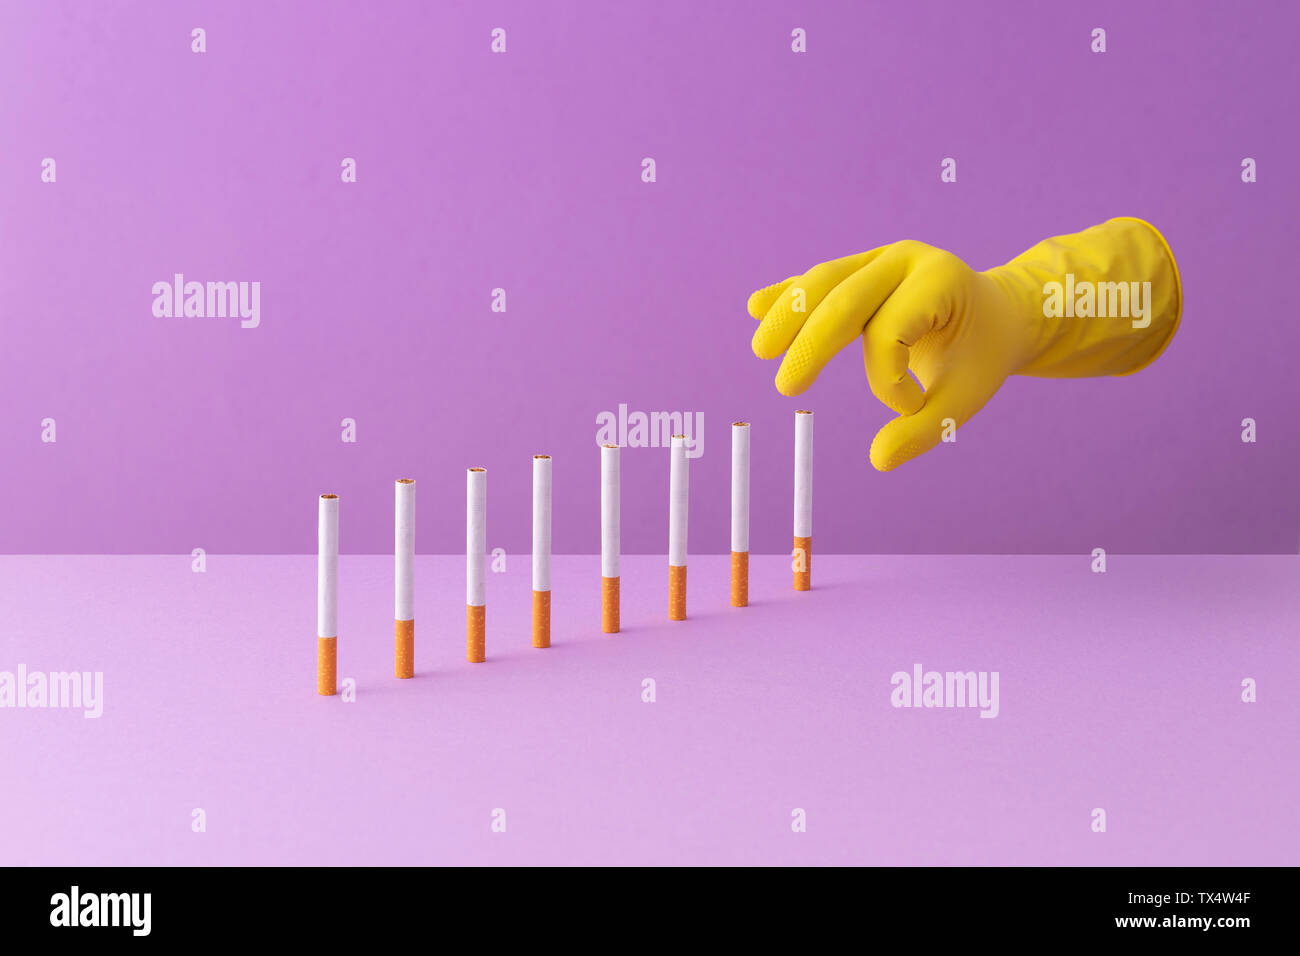 Hand shoving cigarettes in a row, creating a domino effect Stock Photo